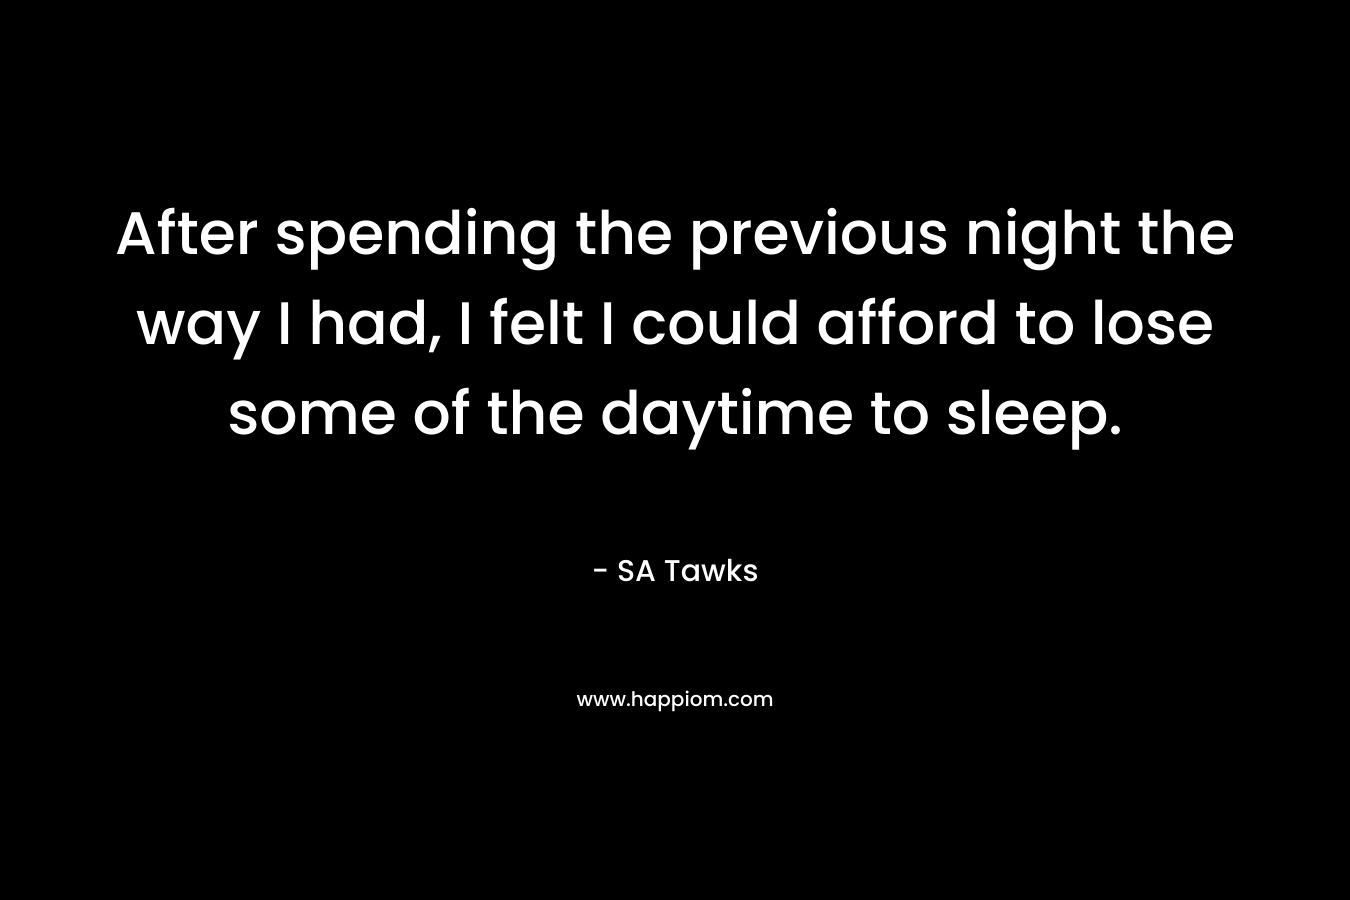 After spending the previous night the way I had, I felt I could afford to lose some of the daytime to sleep.